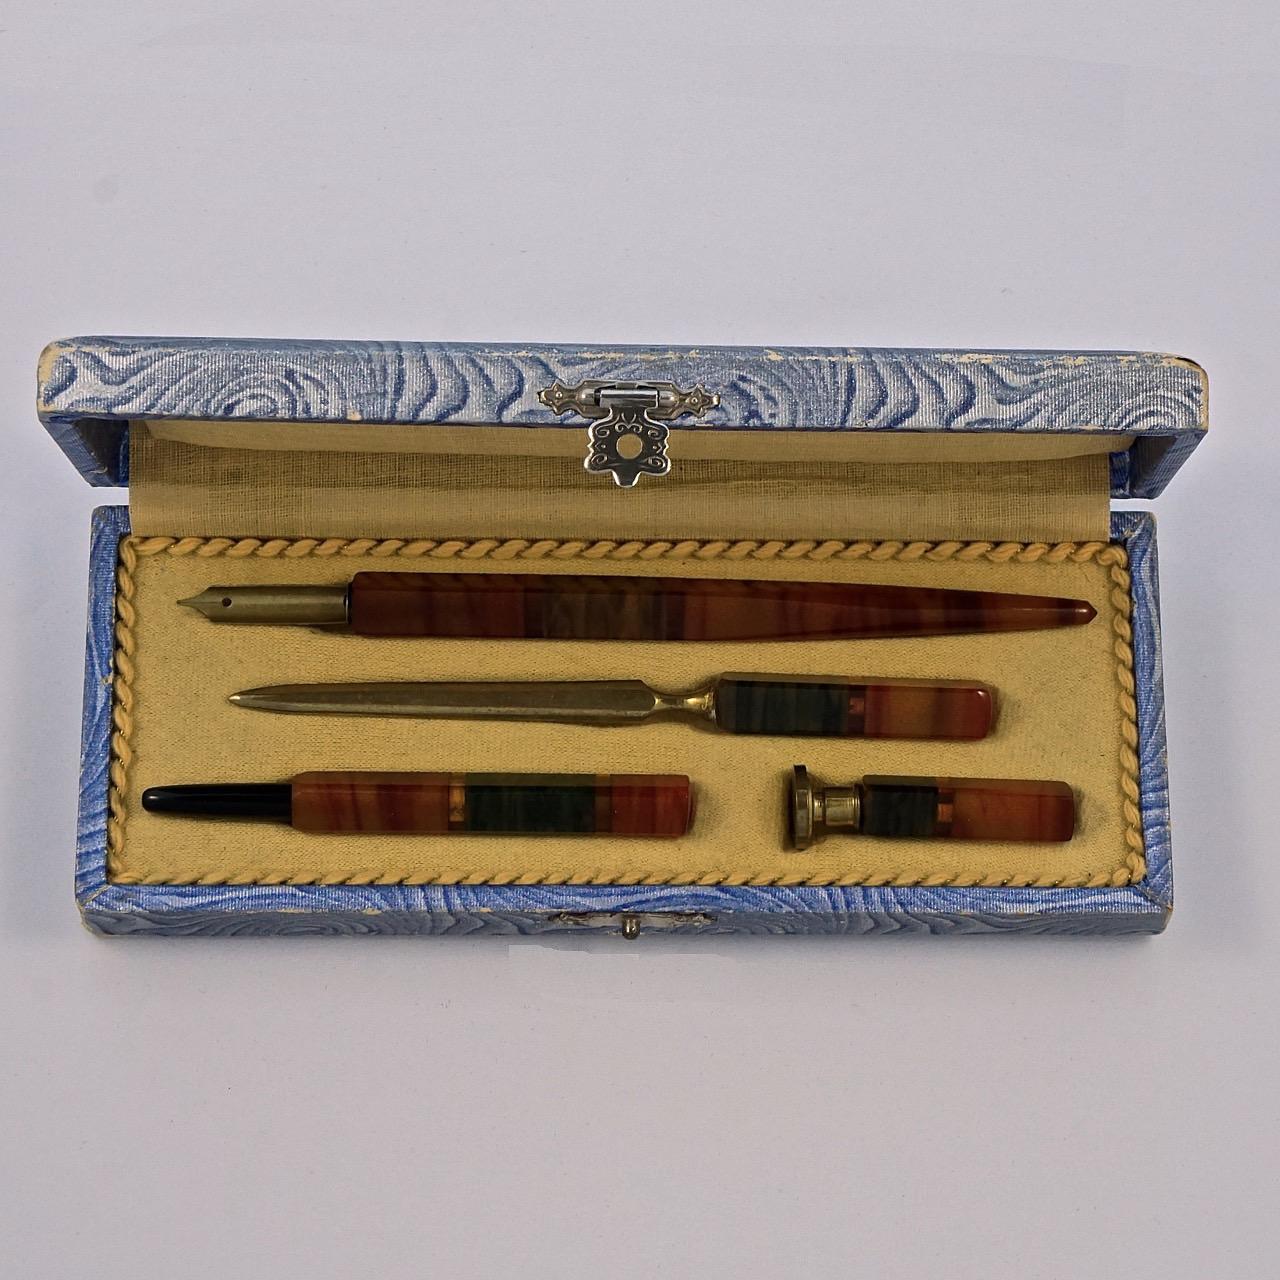 Beautiful Art Deco bakelite desk set in the original box, with an ink pen, revolving pencil with lead, letter opener and seal. The nib is stamped Geo W Hughes, Football, No. 1325, Breadth 5. The set is in very good condition, the blue box is